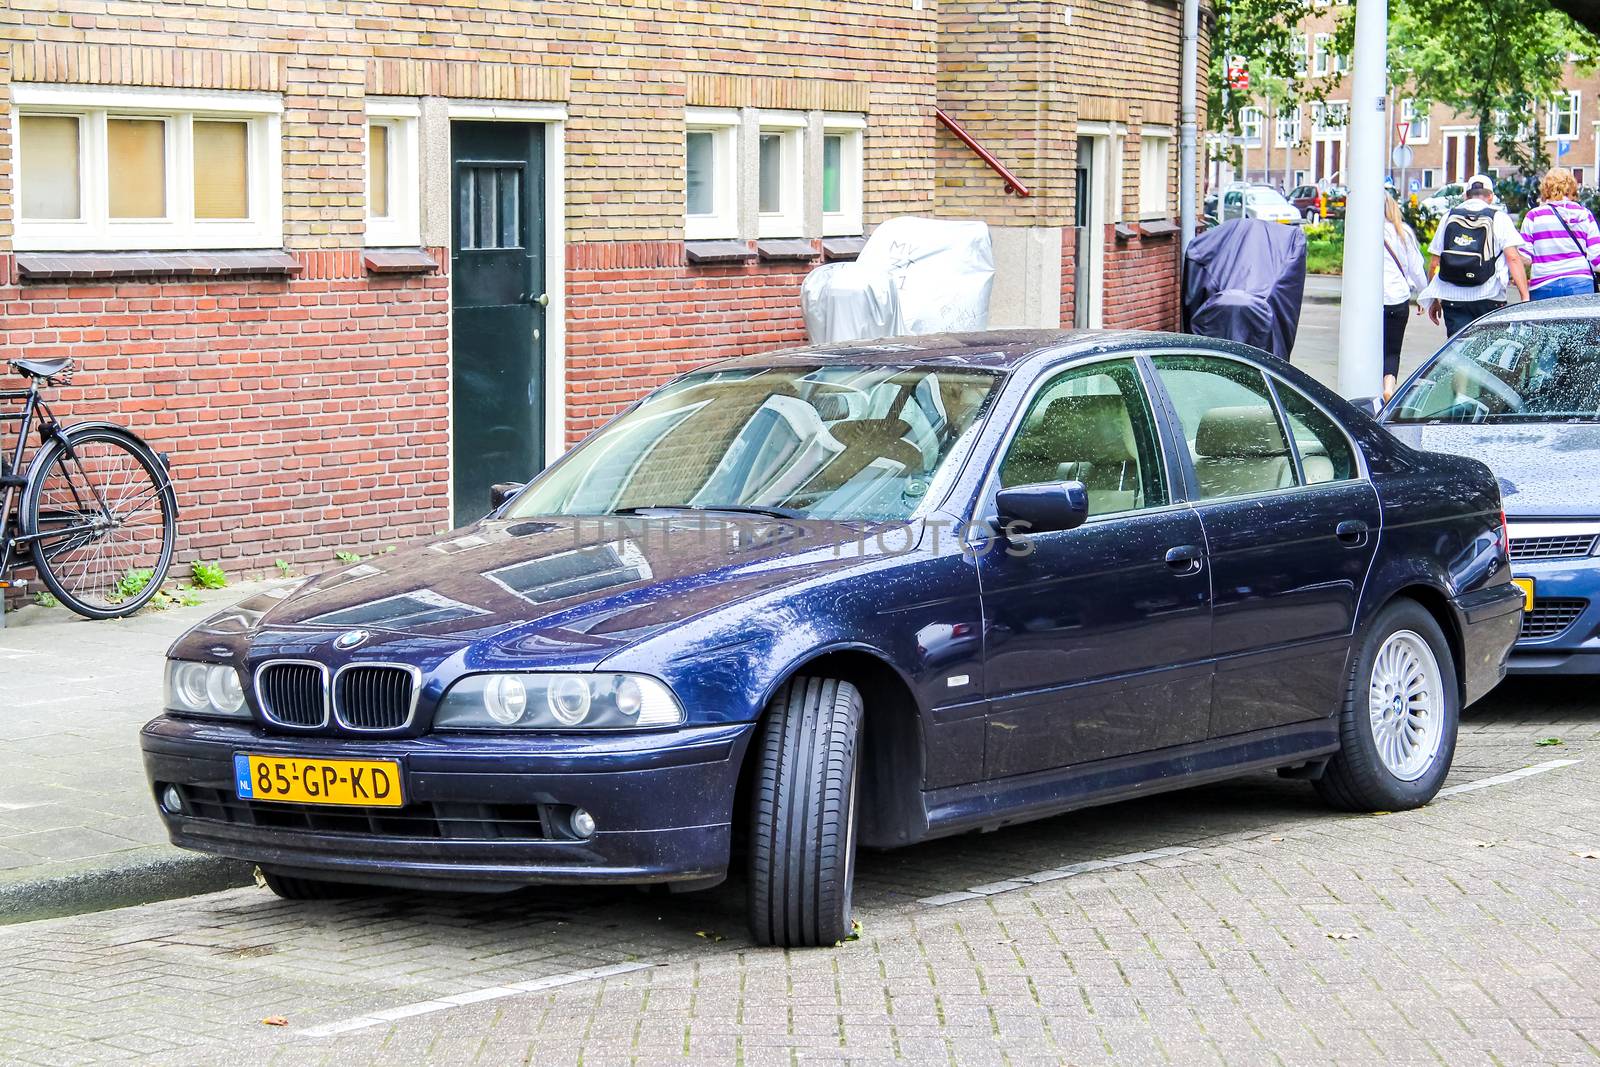 AMSTERDAM, NETHERLANDS - AUGUST 10, 2014: Motor car BMW E39 5-series at the city street.